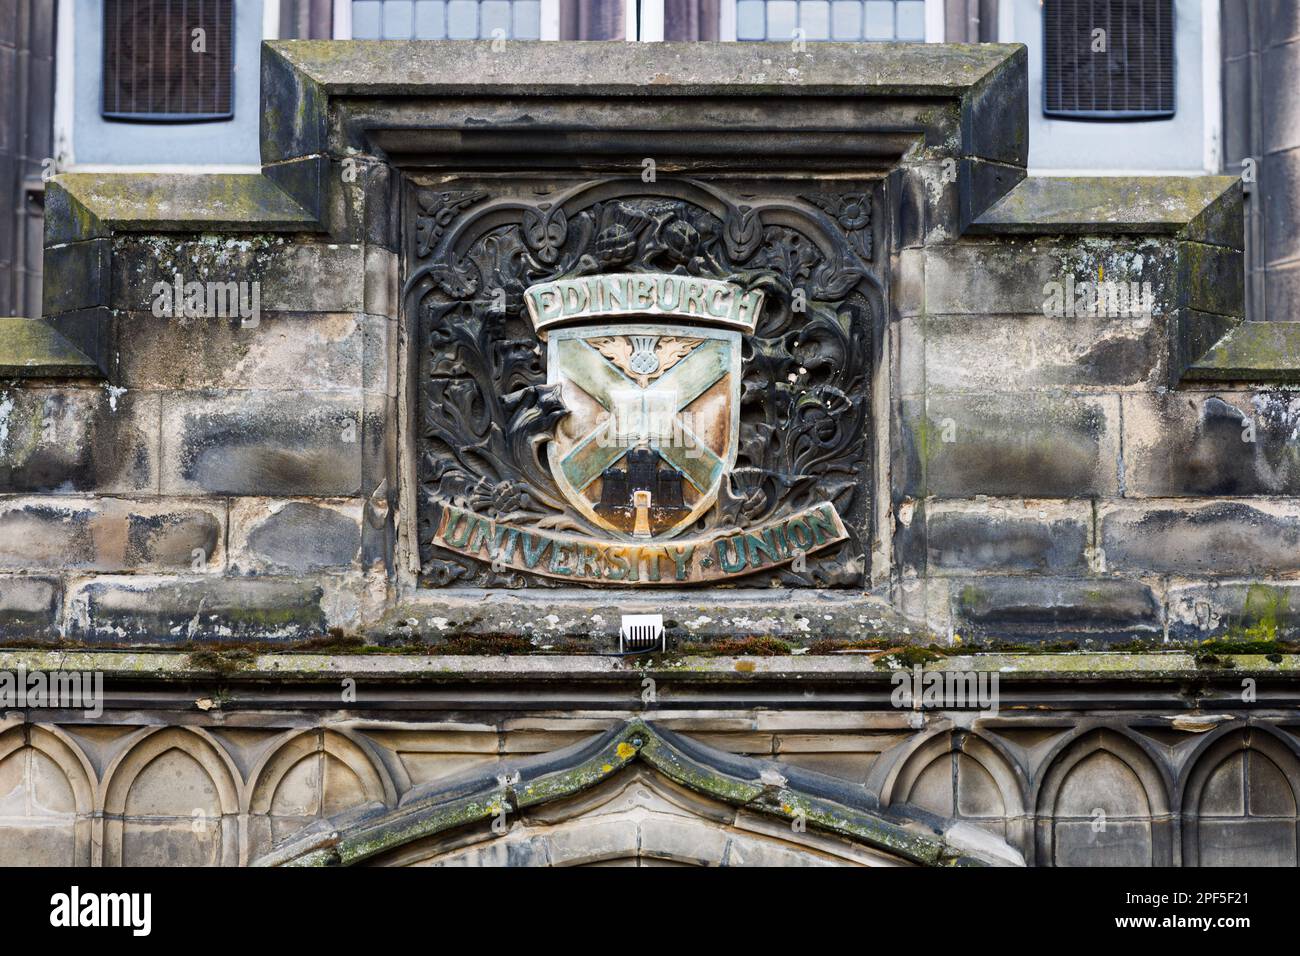 The crest of the Edinburgh University Union above the main entrance of Teviot Row House, one of the main buildings of EUSA in Bristo Square. Stock Photo